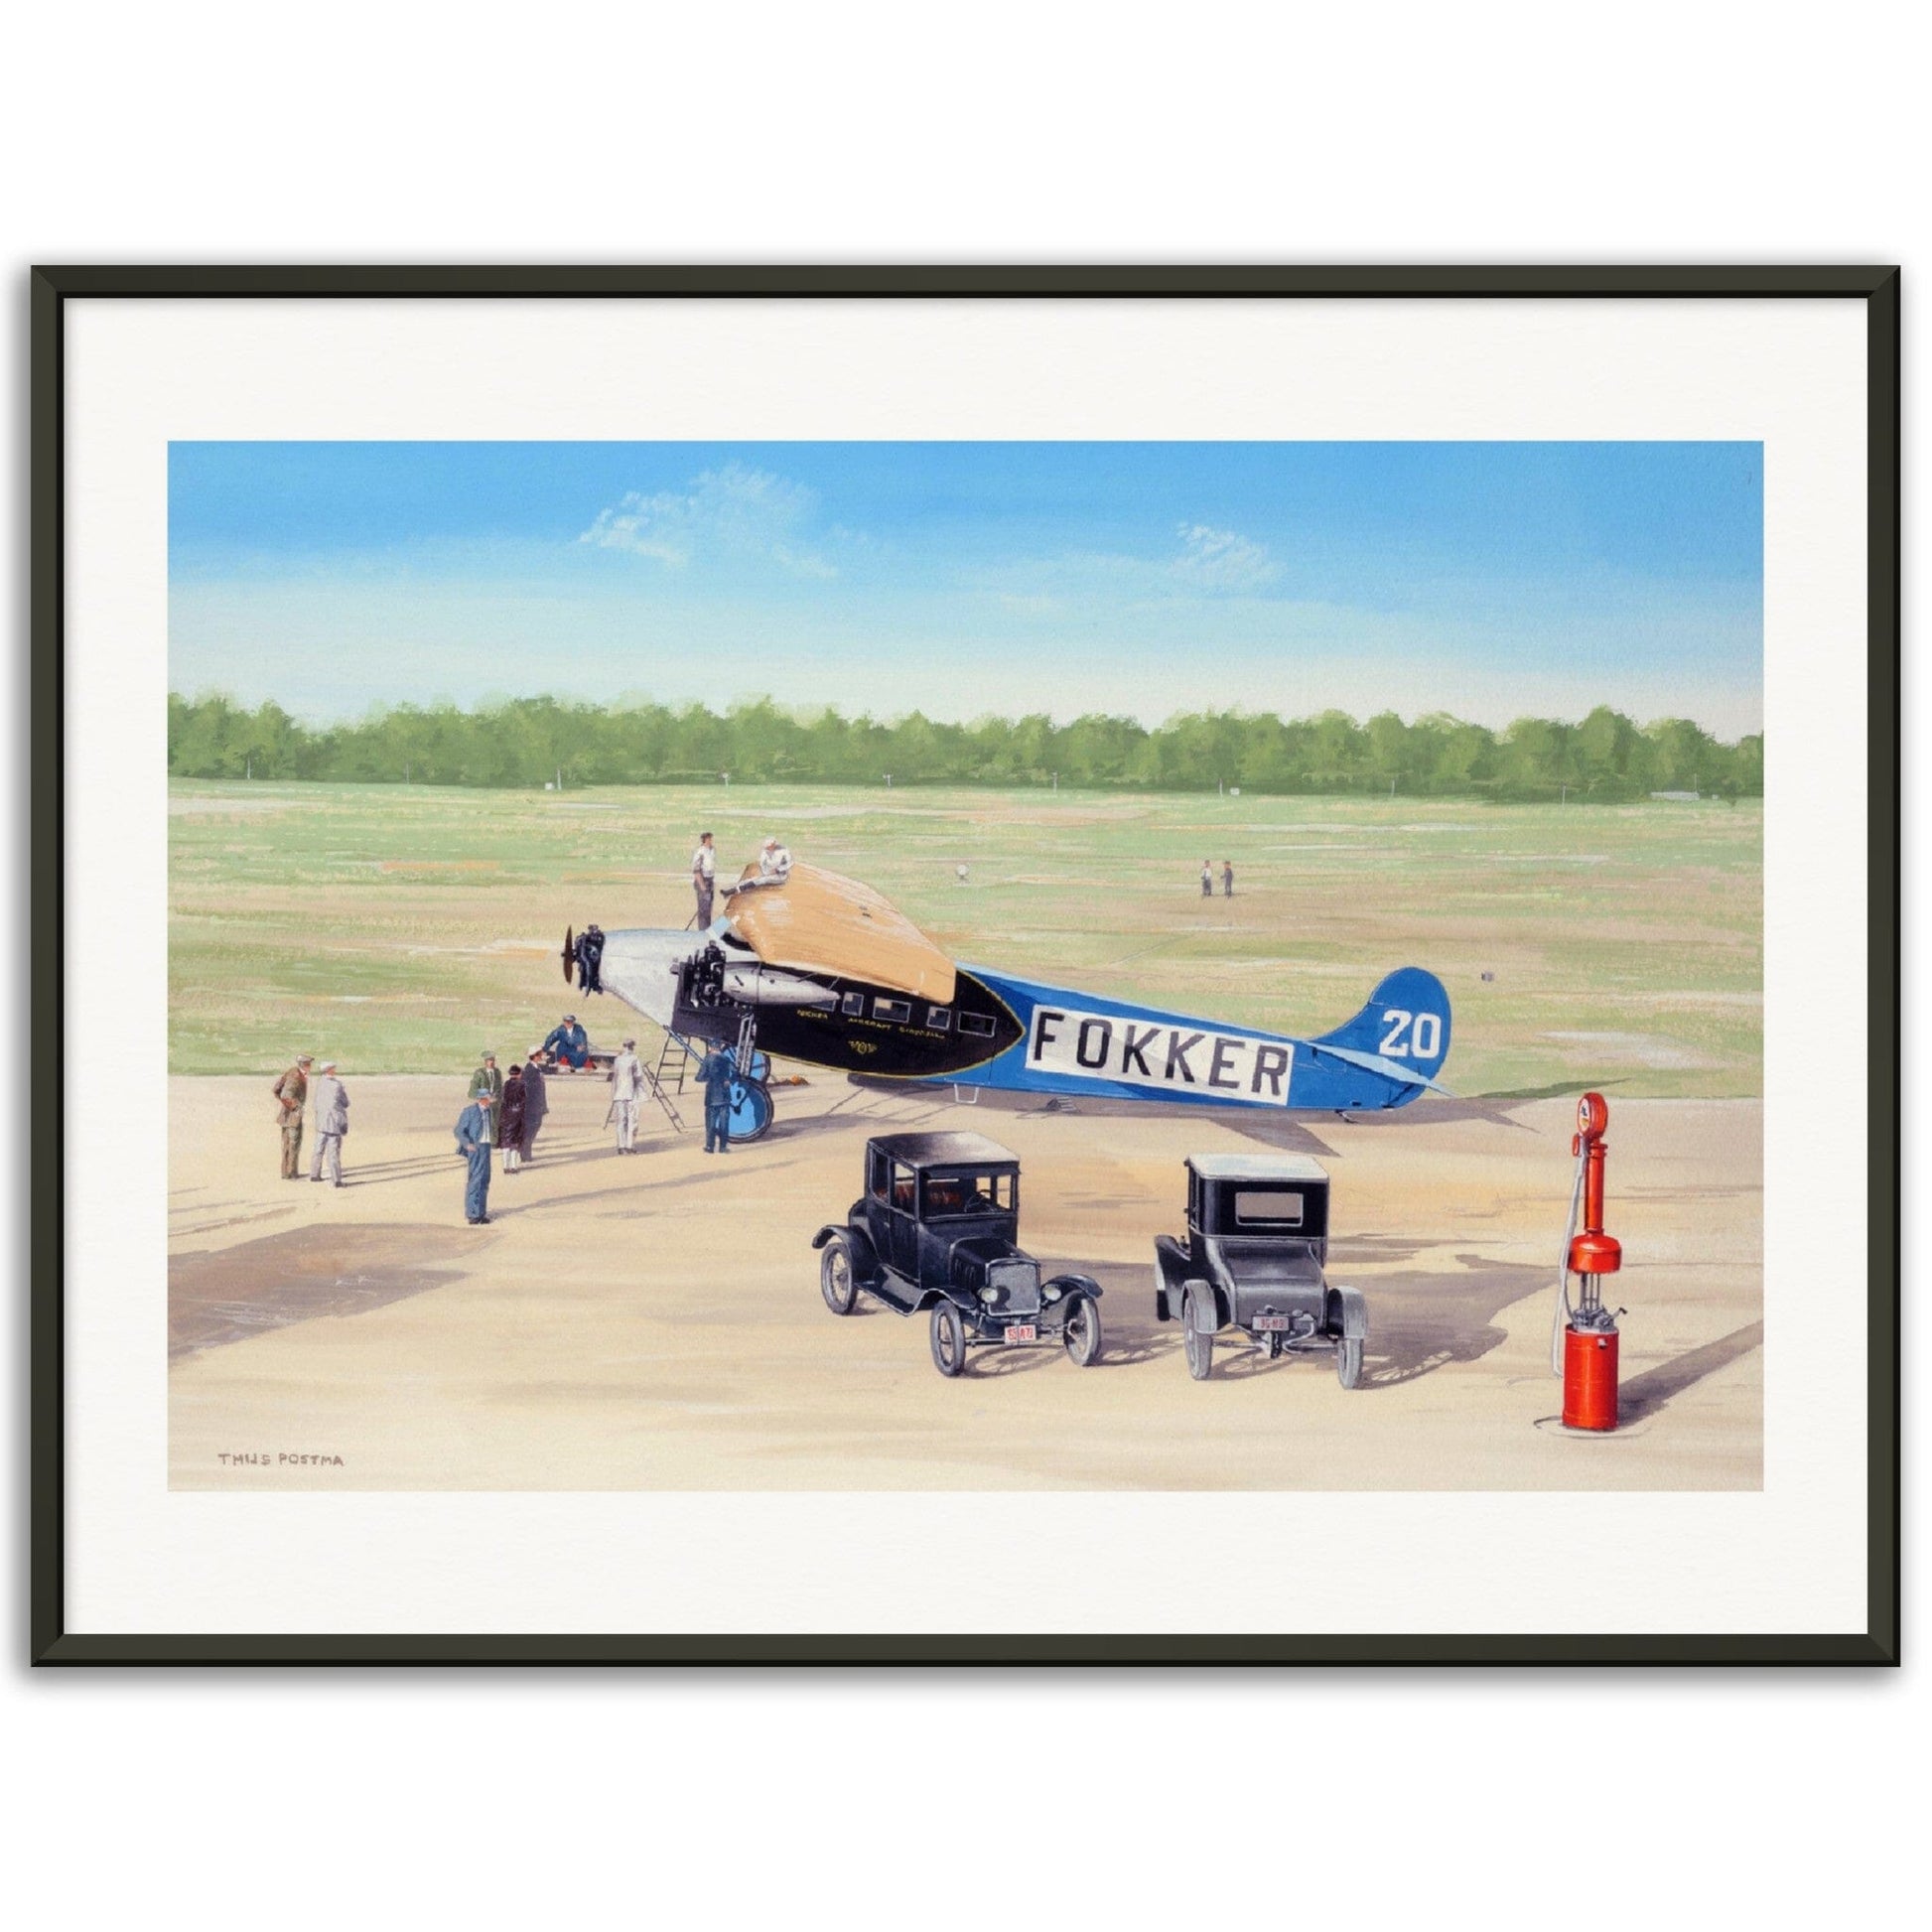 Thijs Postma - Poster - Fokker F.7/3m During Ford Reliability Tour - Metal Frame Poster - Metal Frame TP Aviation Art 60x80 cm / 24x32″ 